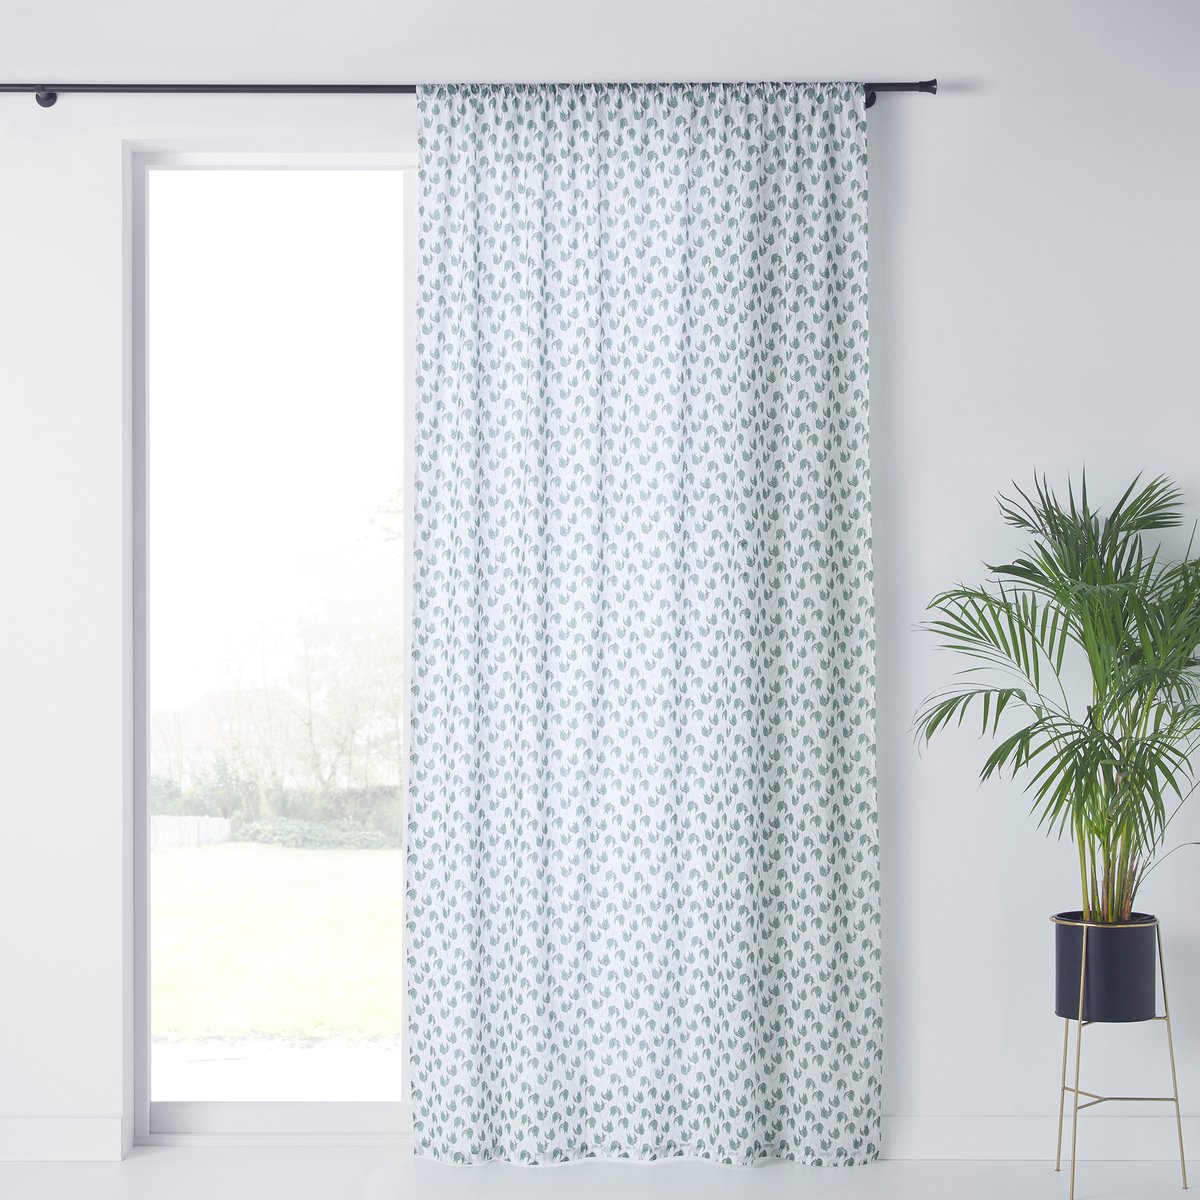 Image of Lenita Printed Single Curtain in Cotton with Rod Pocket.